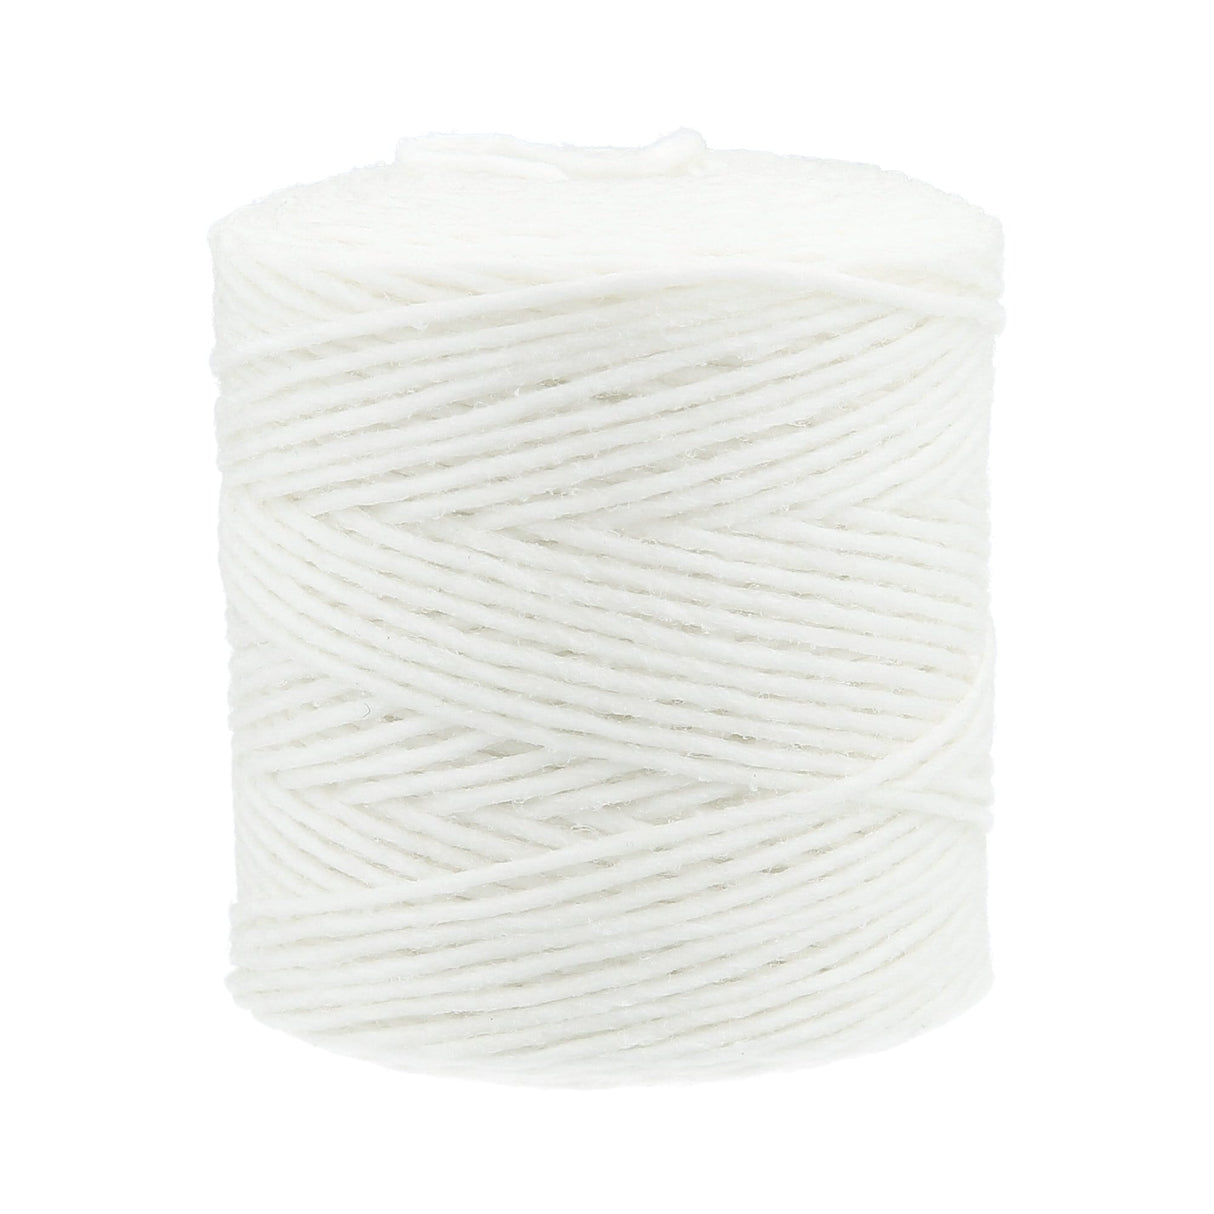 Ohio Travel Bag Strapping 4 oz White, Waxed Hand Sewing Thread, #415-WHT 415-WHT